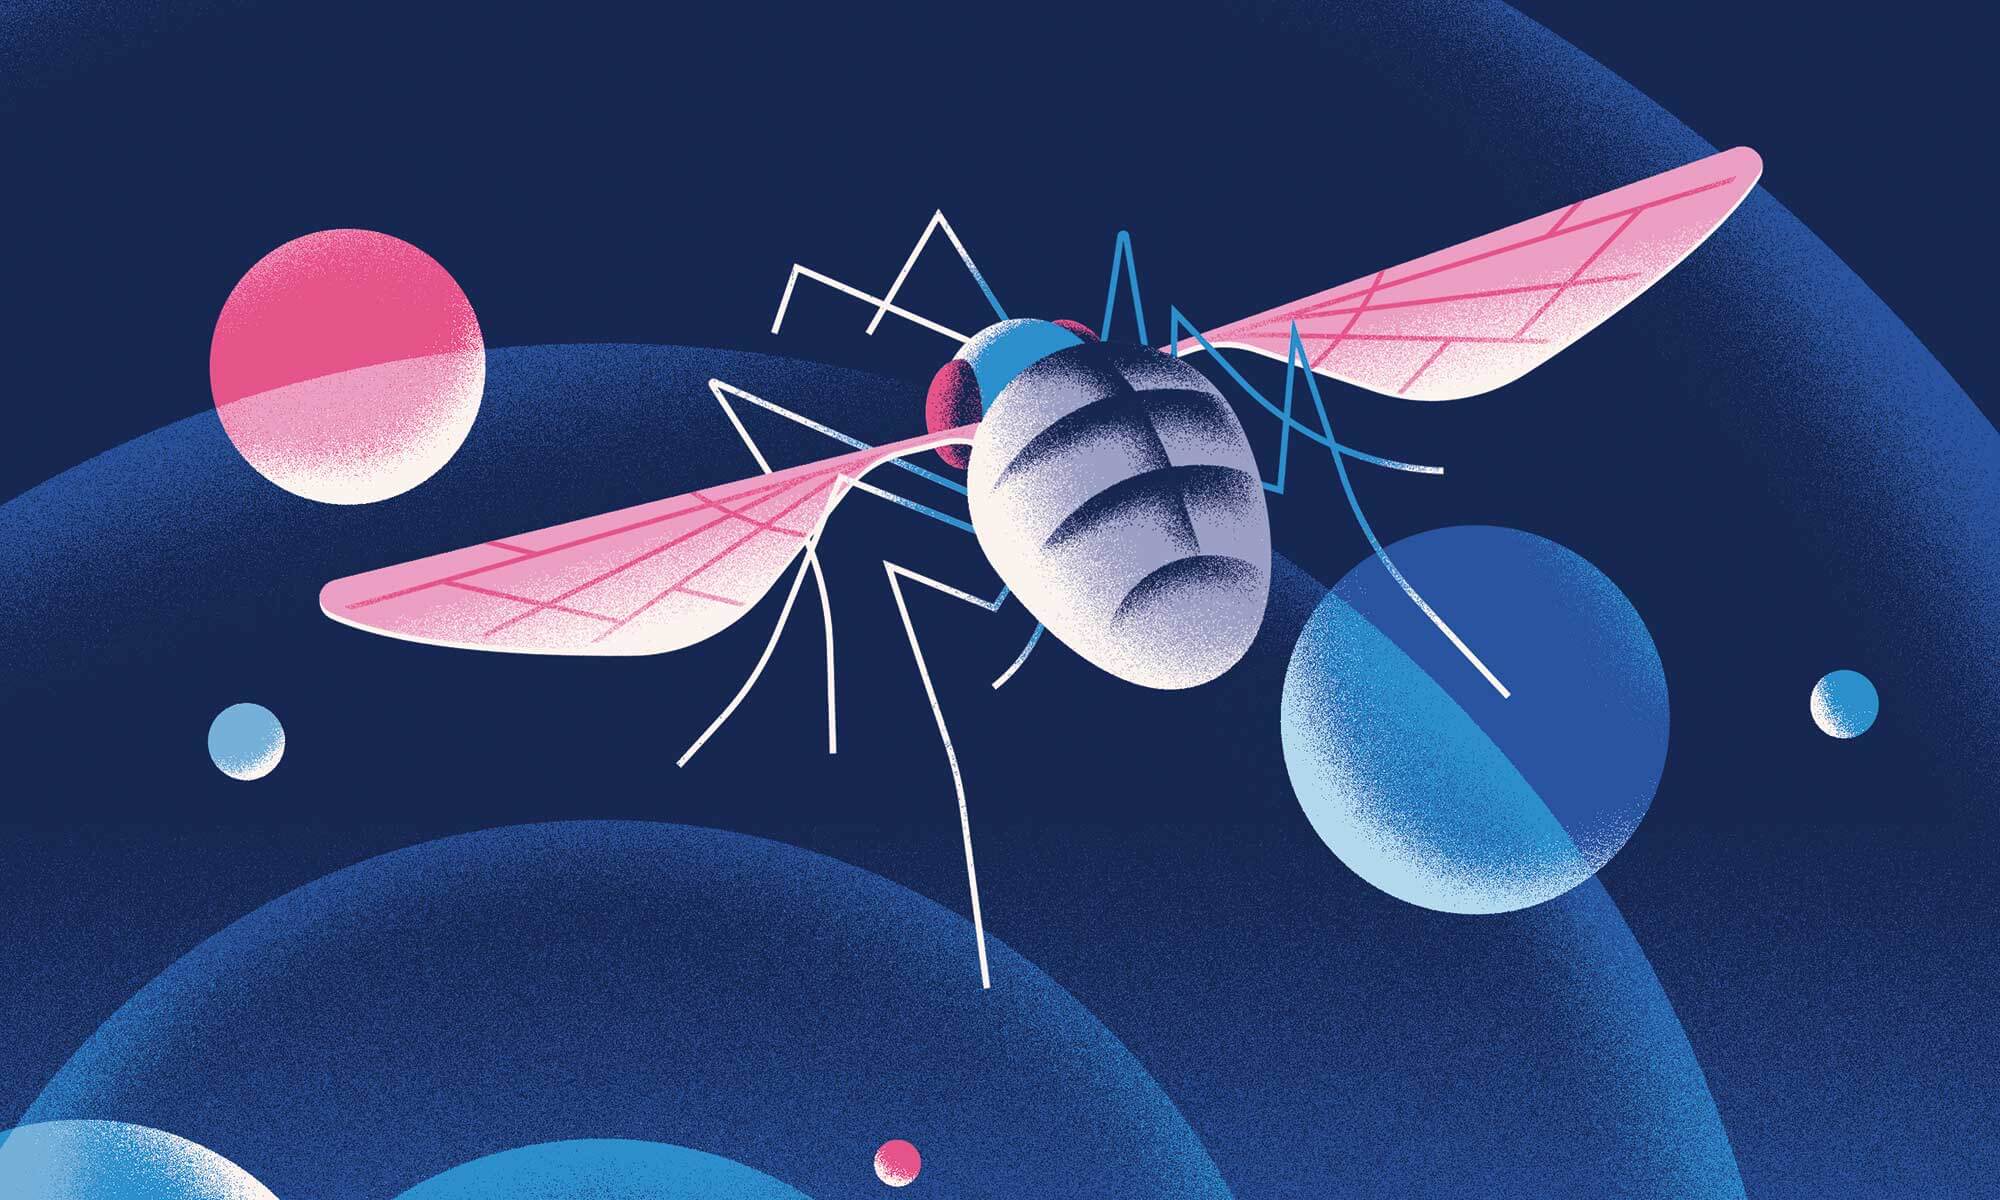 Scientists have measured the minds of fruit flies. But why?